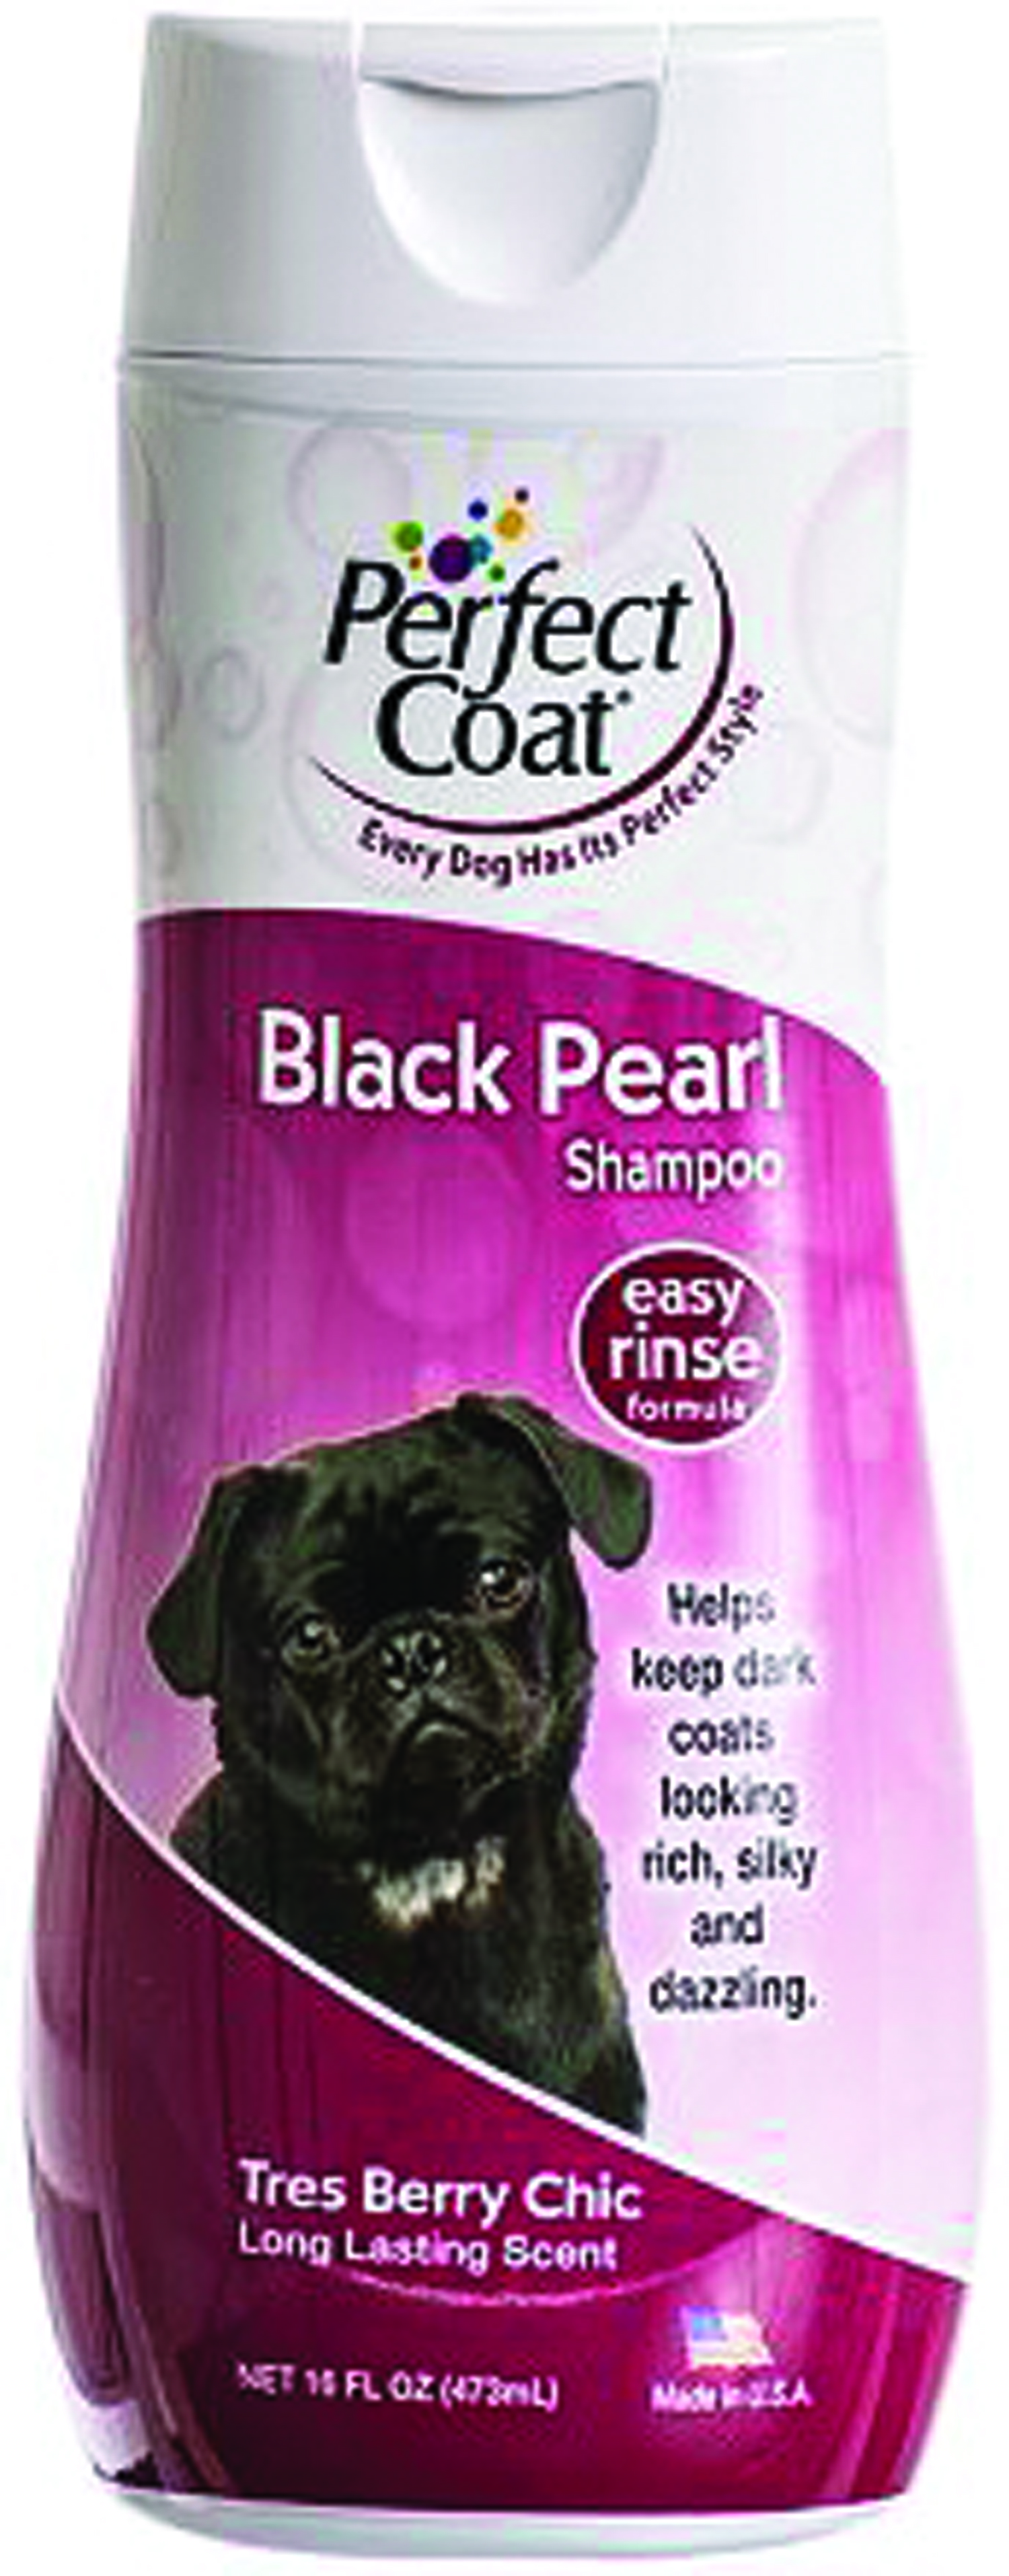 PERFECT COAT SHAMPOO & CONDITIONER FOR DOGS